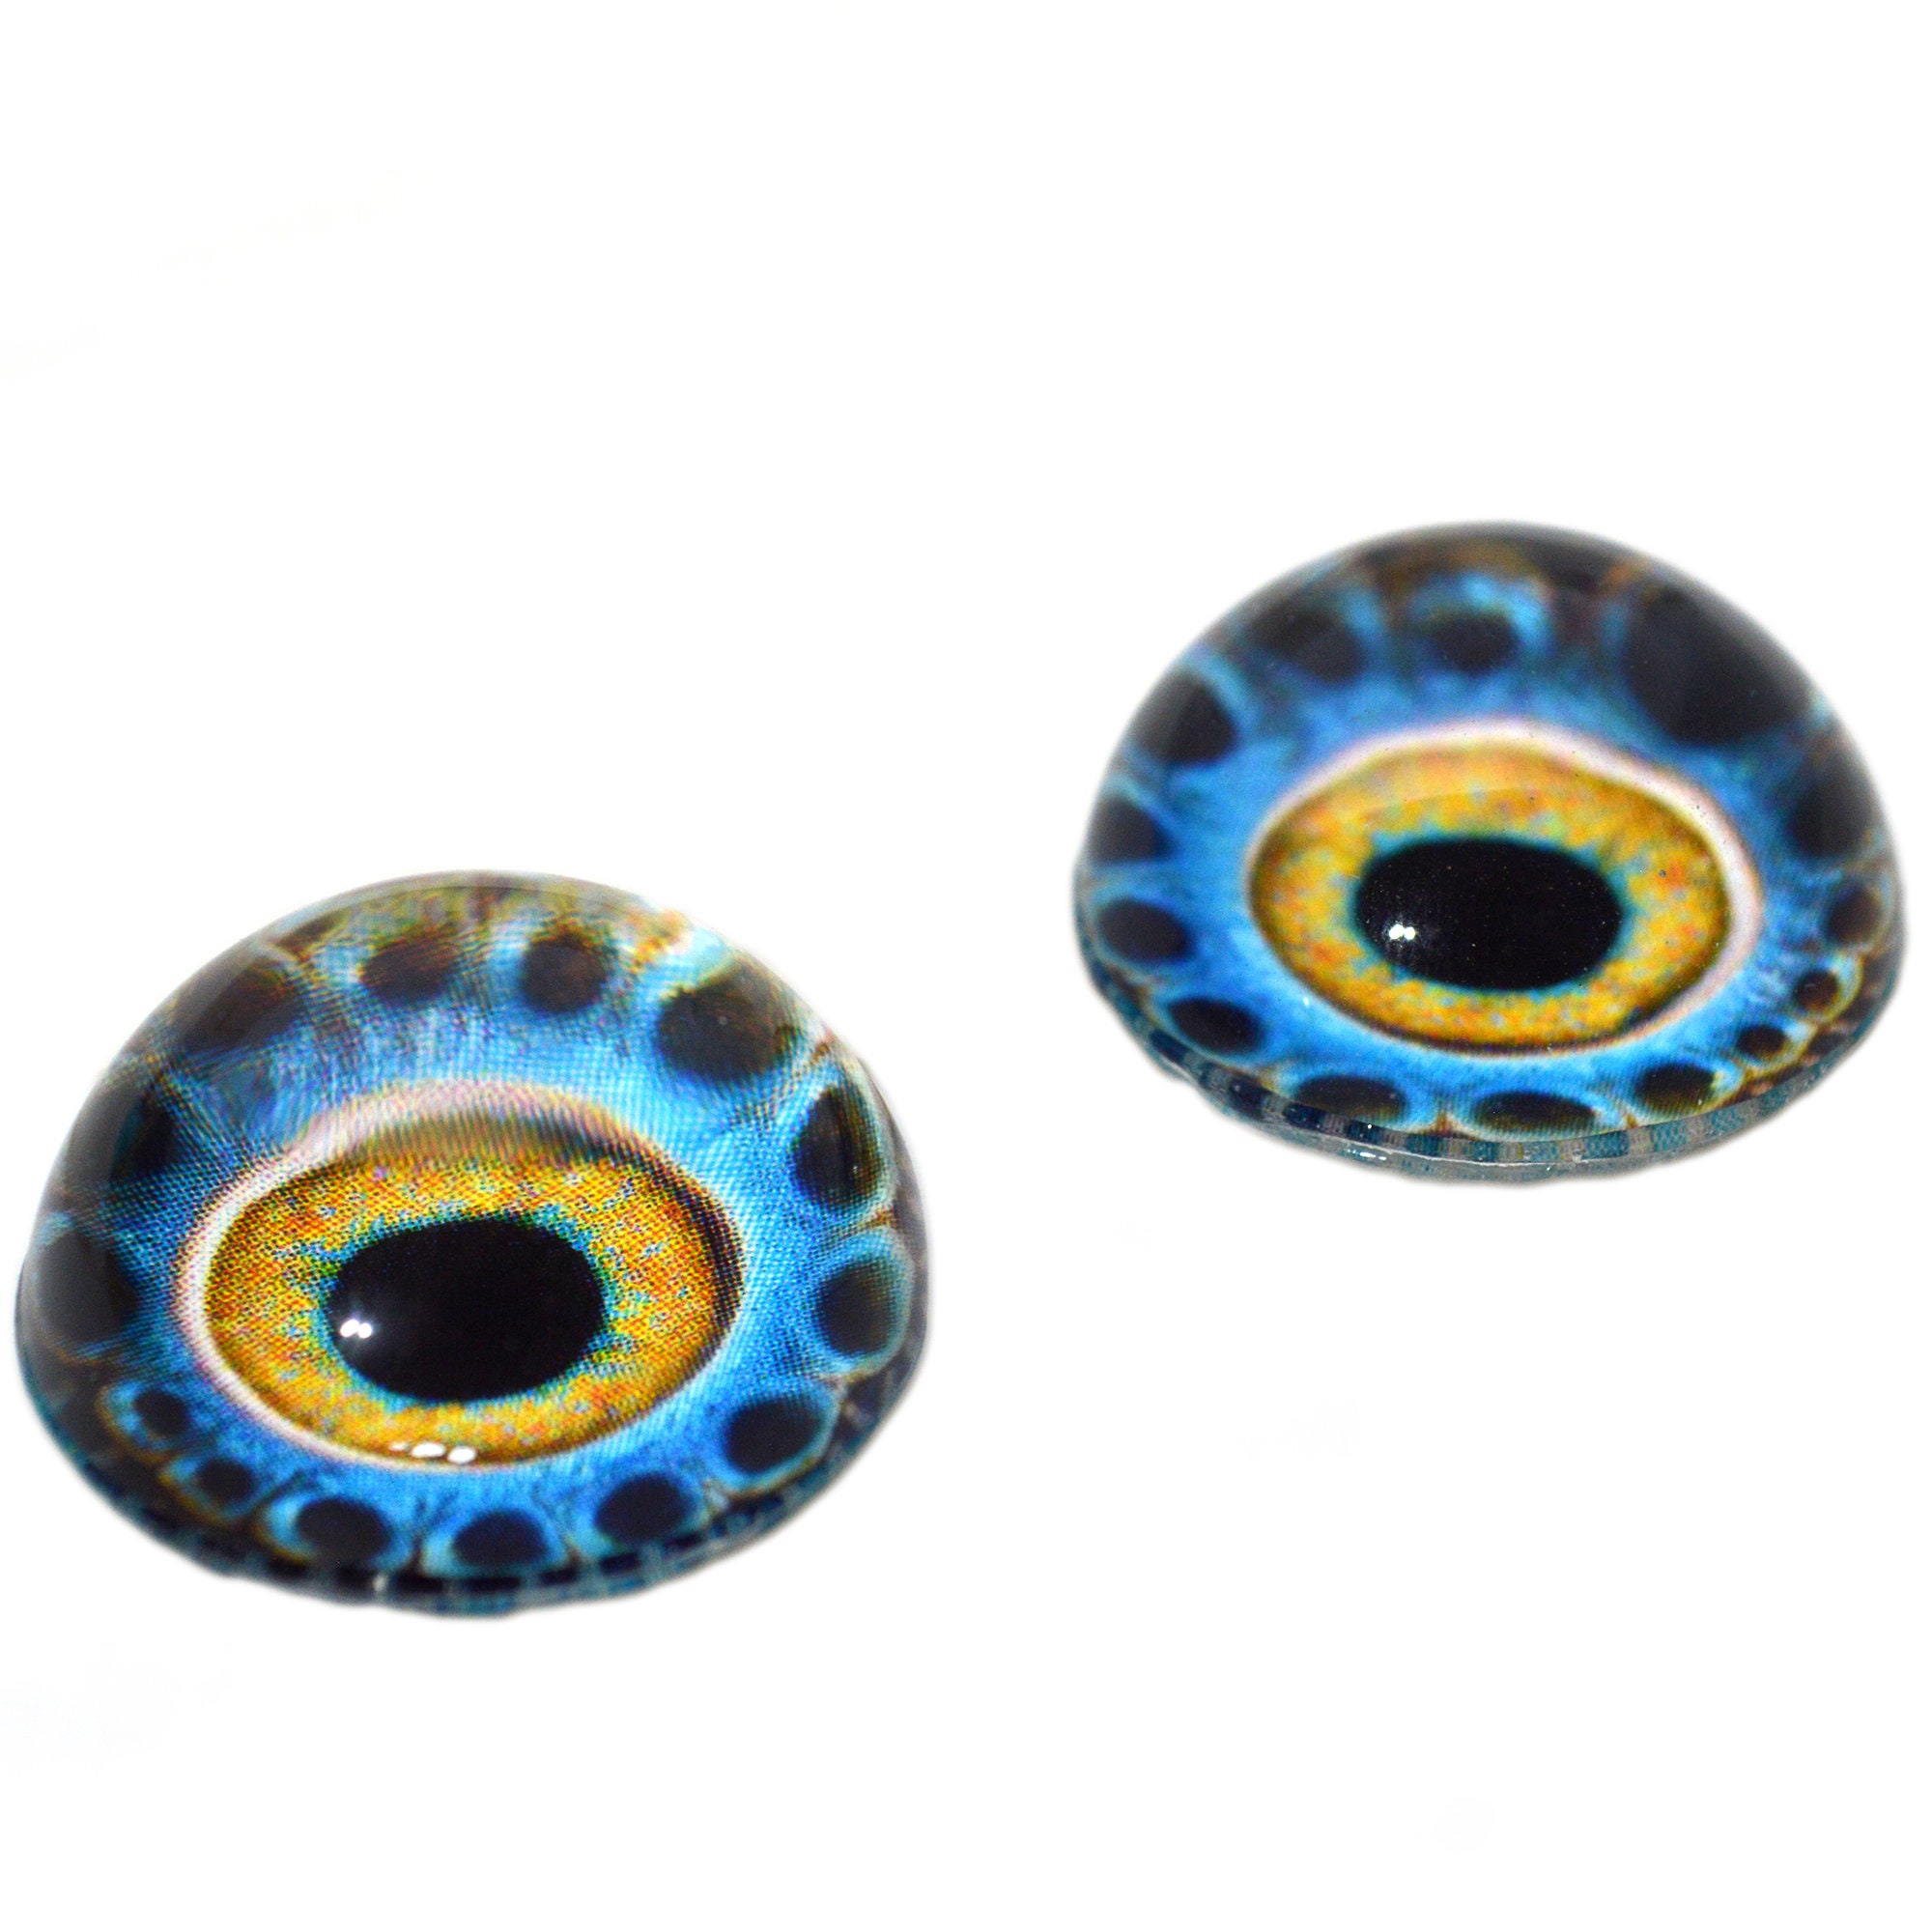 Yellow and Blue Crackle Dragon Oval Glass Eyes Fantasy Taxidermy Art Doll  Making, Fantasy Sculptures or Jewelry Crafts Set of 2 (18mm x 25mm)